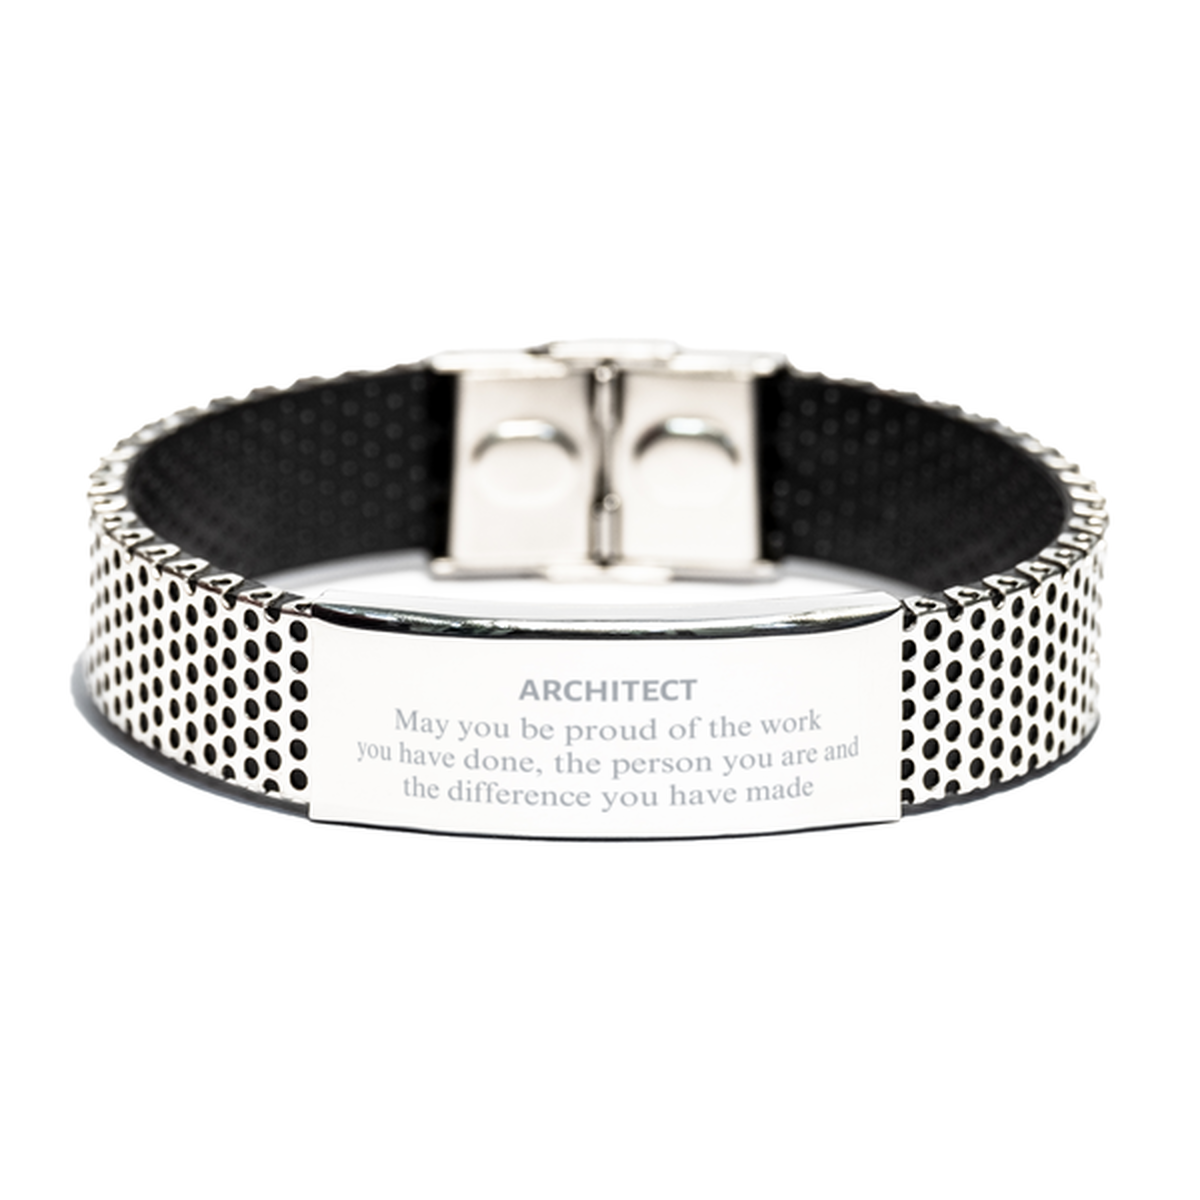 Architect May you be proud of the work you have done, Retirement Architect Stainless Steel Bracelet for Colleague Appreciation Gifts Amazing for Architect